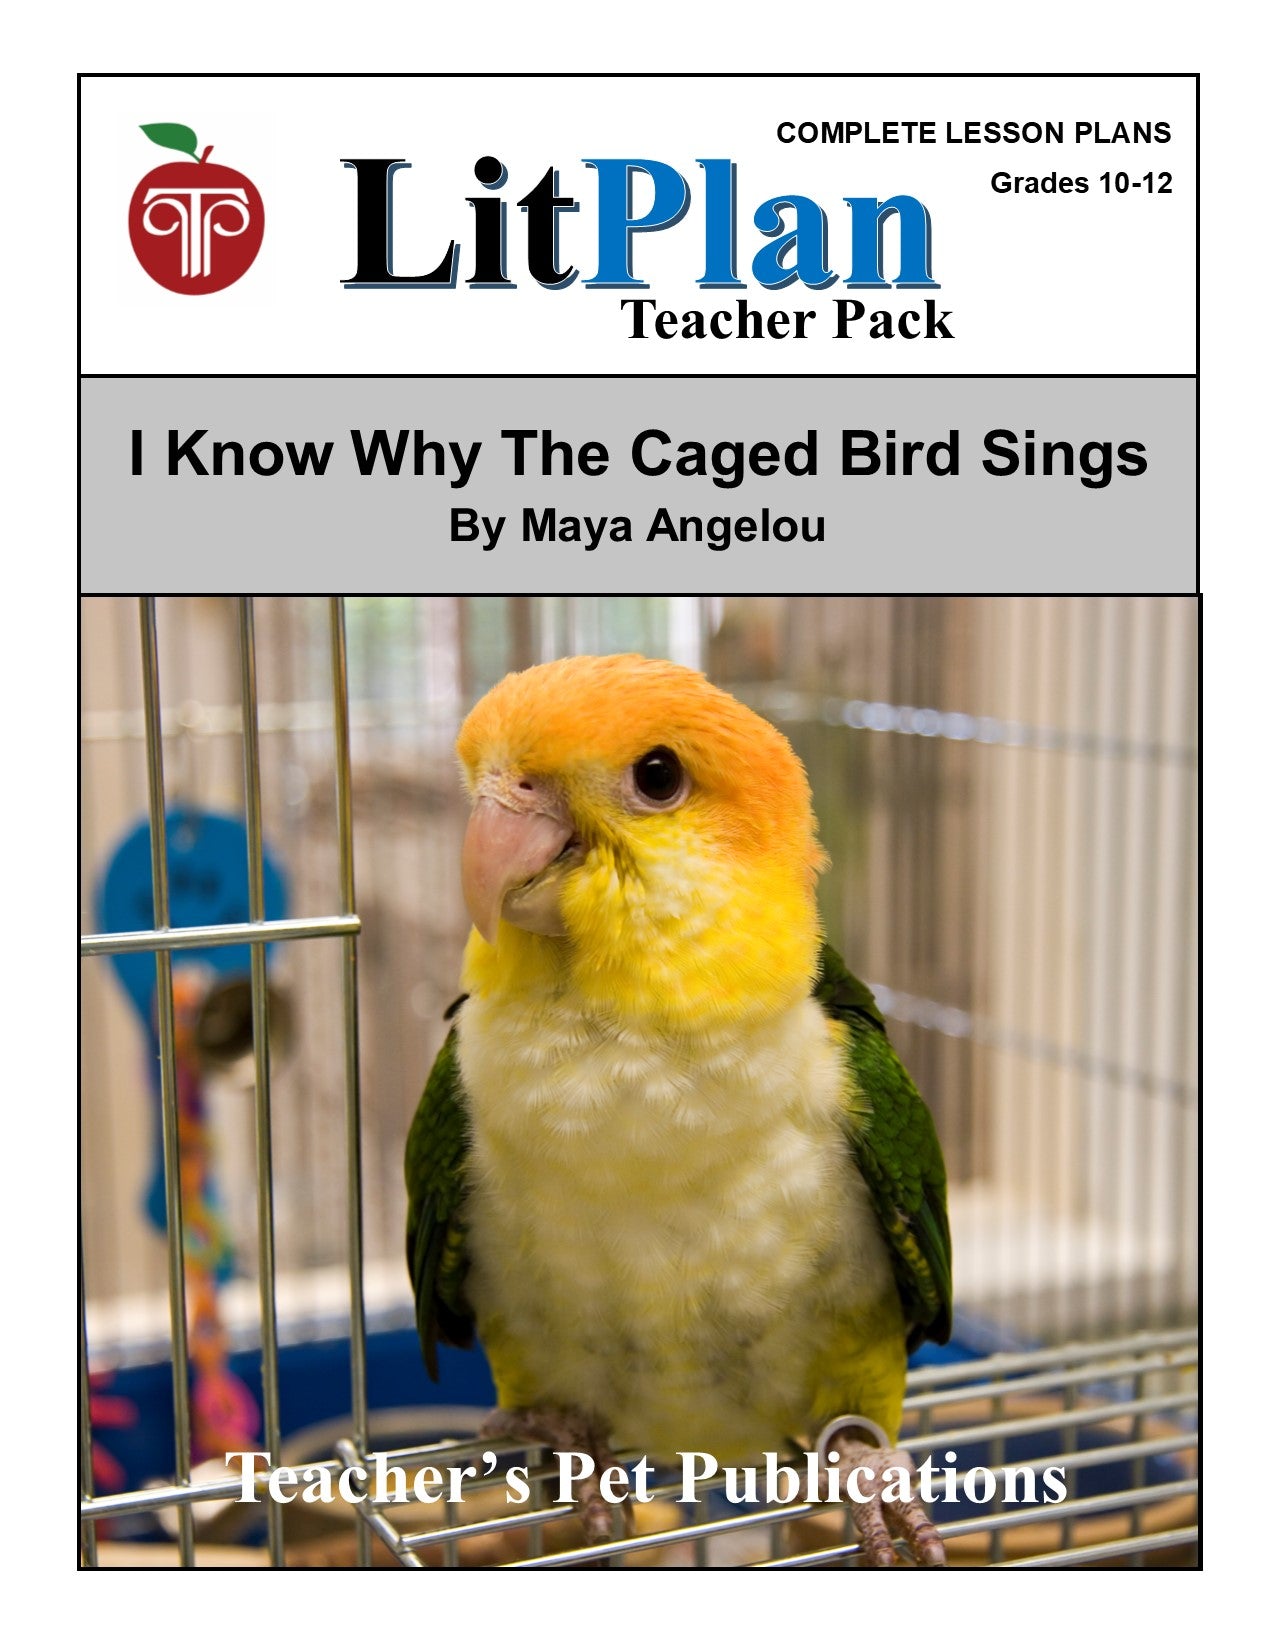 I Know Why The Caged Bird Sings: LitPlan Teacher Pack Grades 10-12